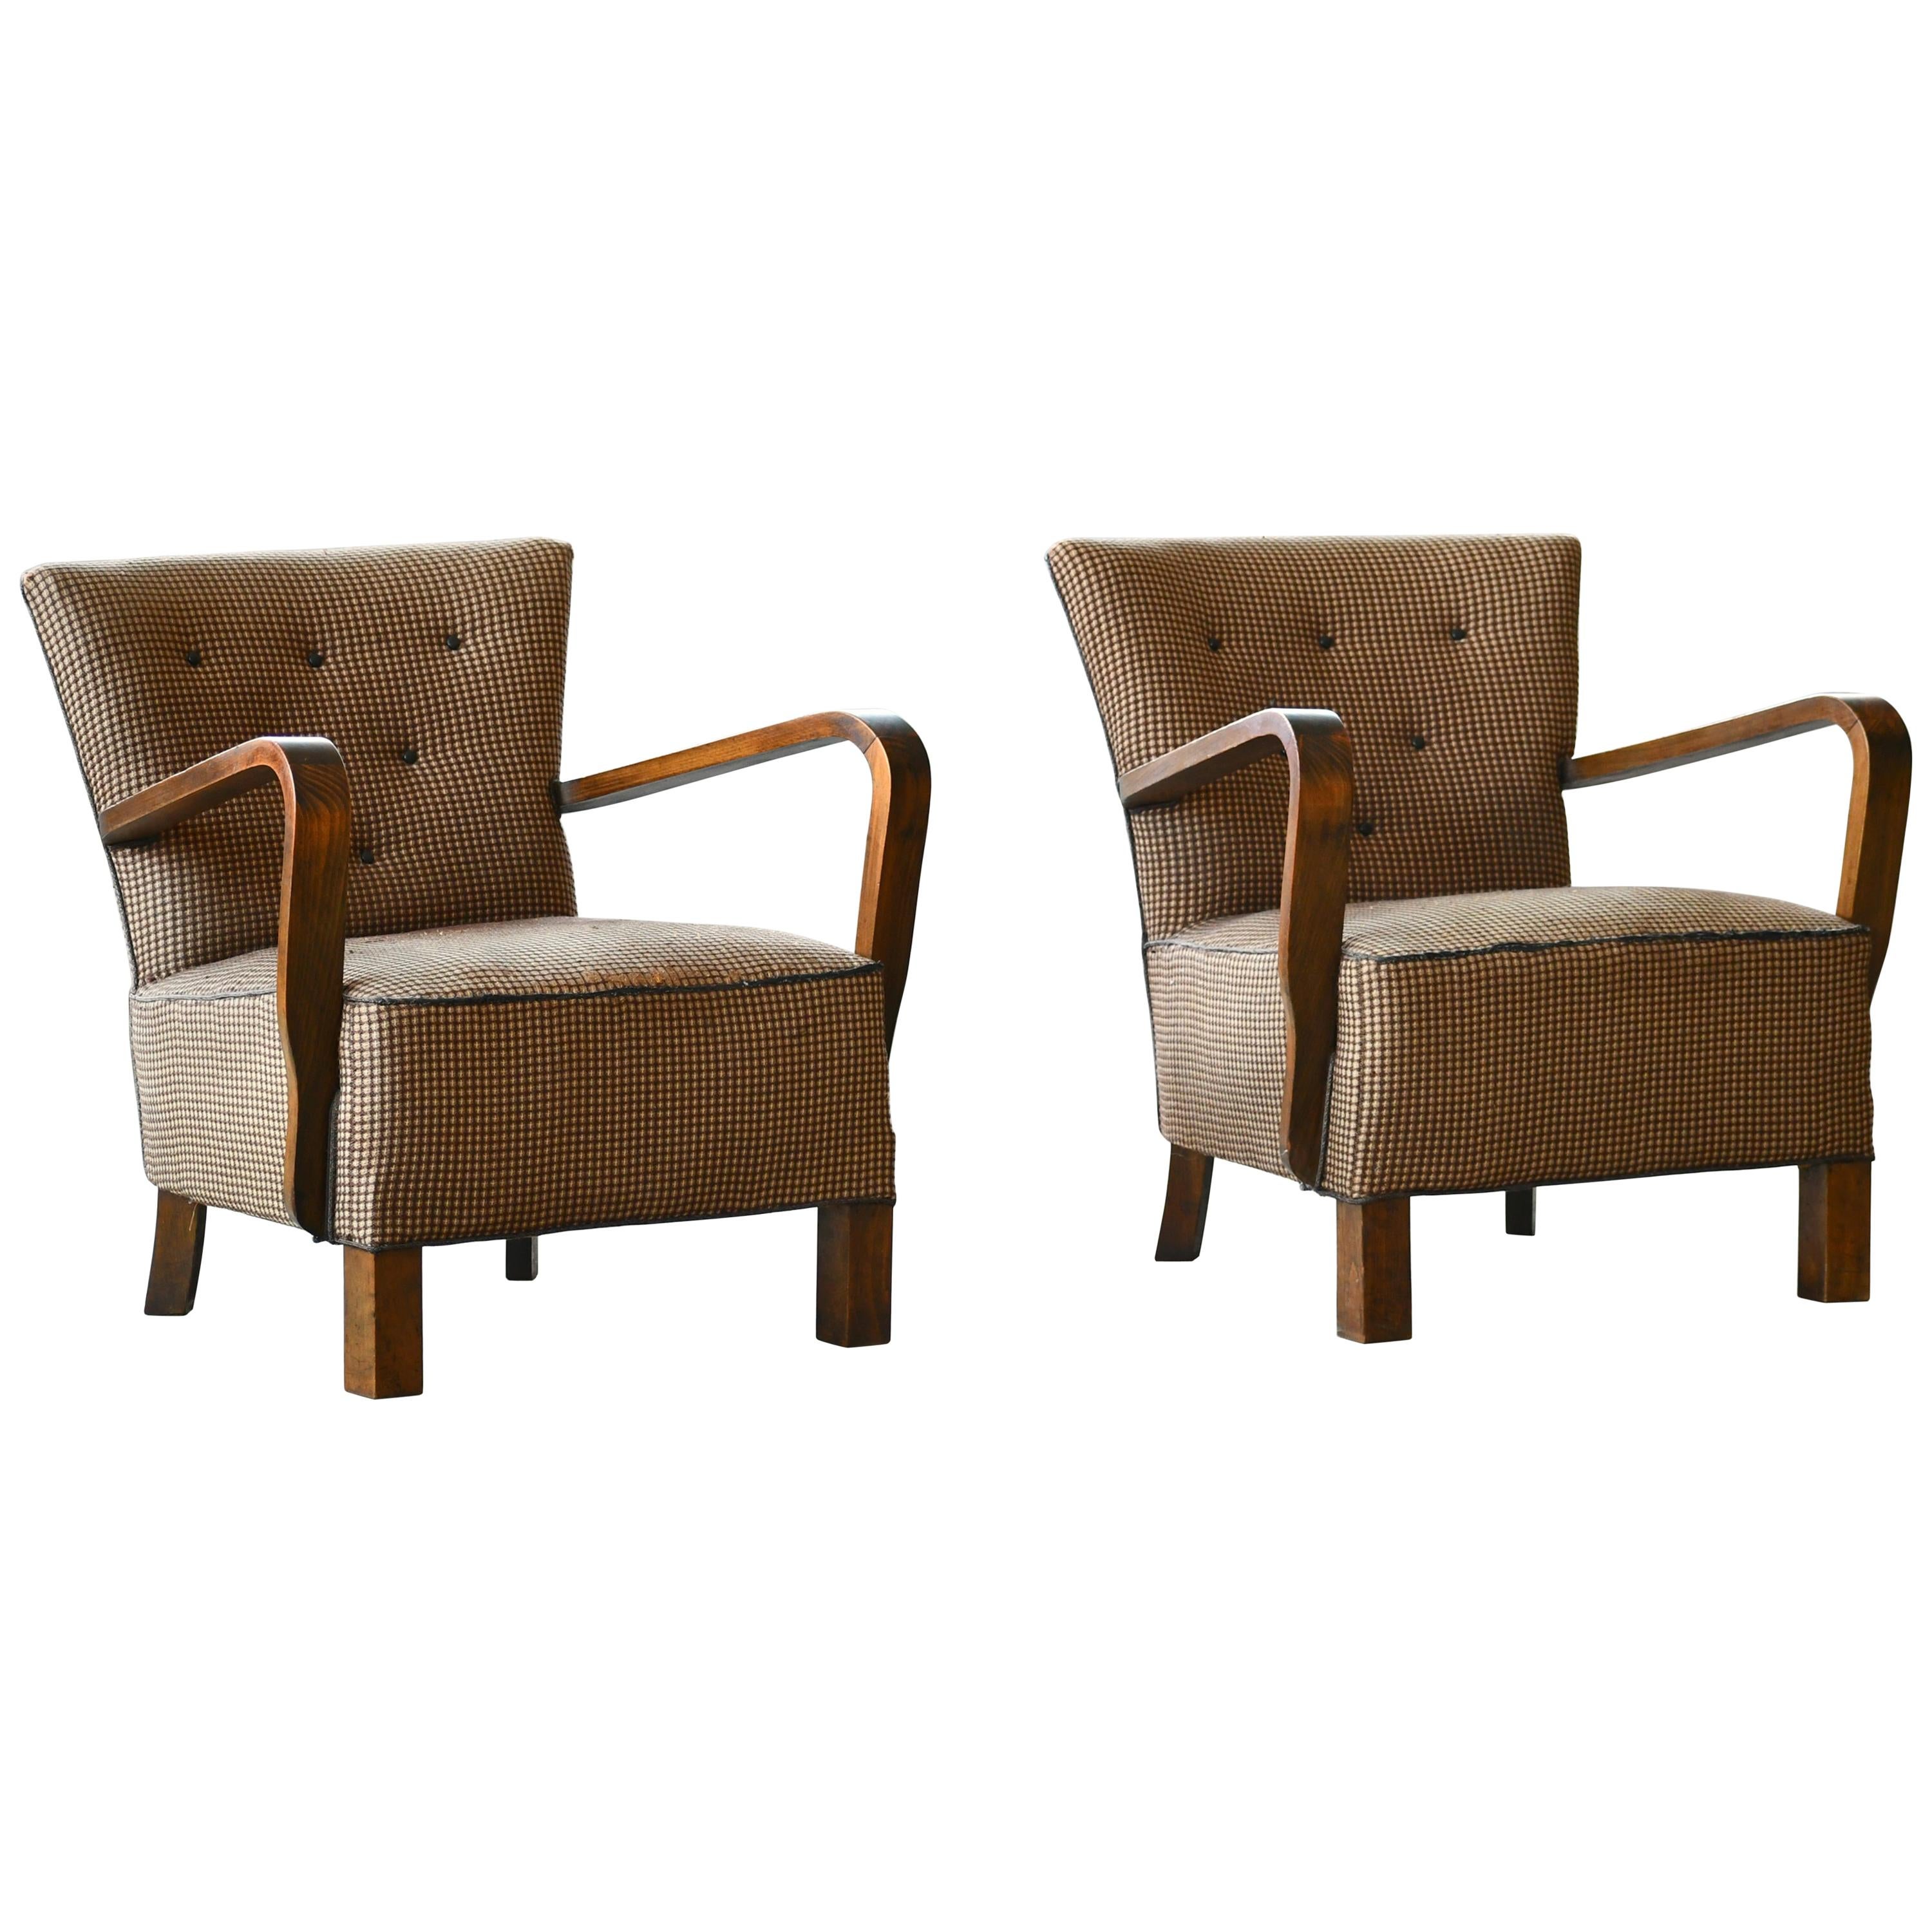 Pair of Danish Early Midcentury or Art Deco Low Lounge Chairs in Mahogany, 1940s